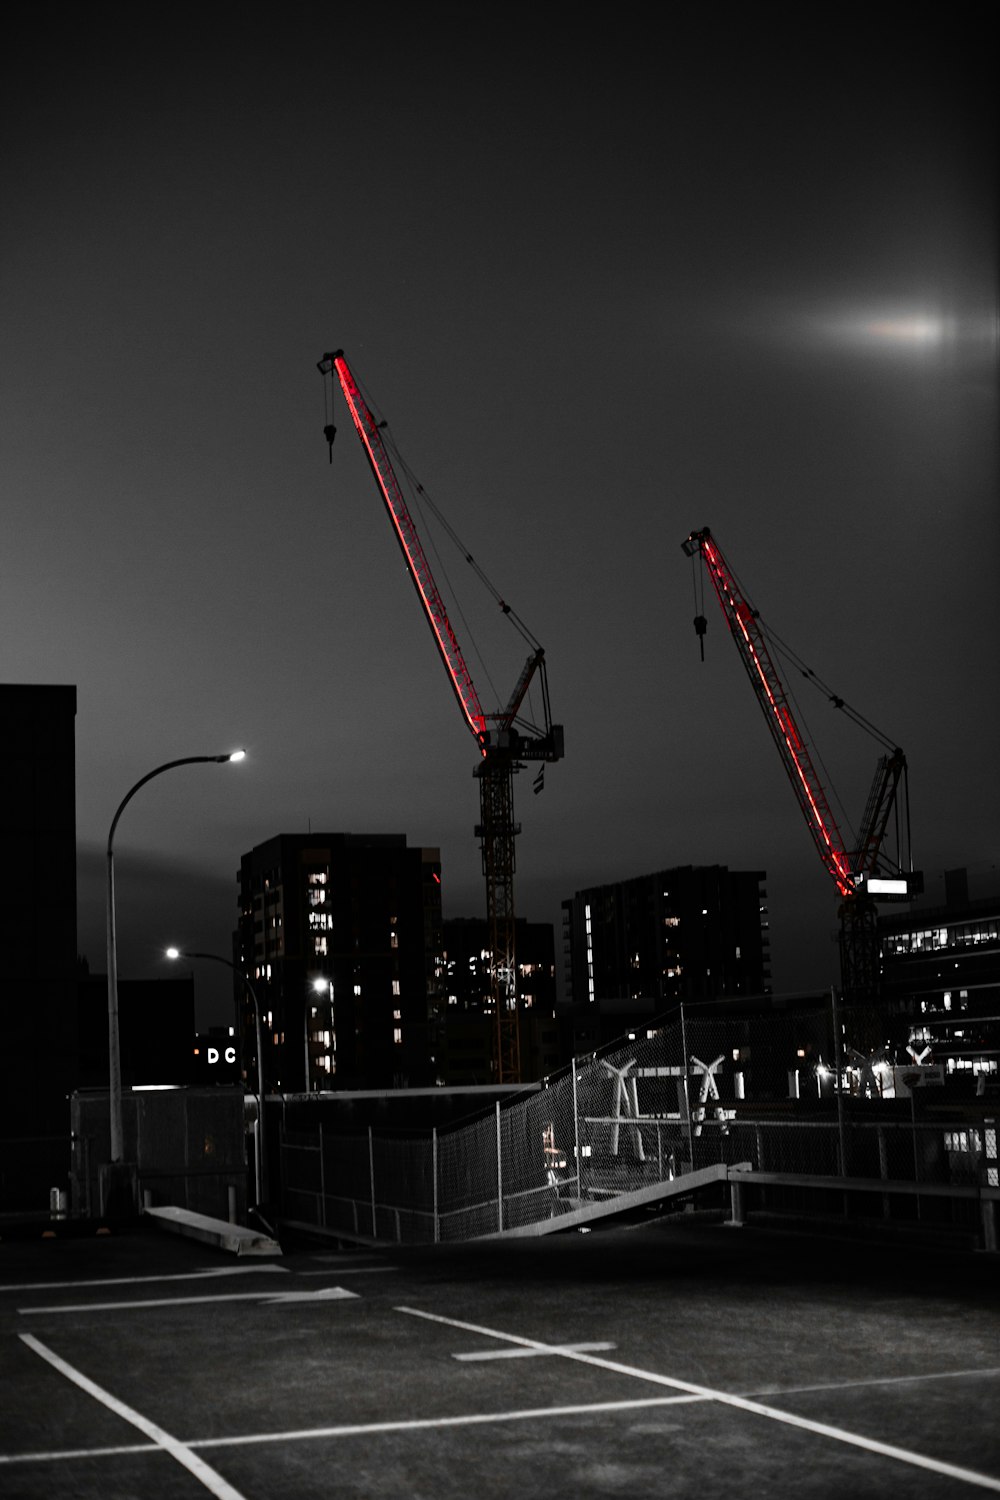 red and black crane near building during night time